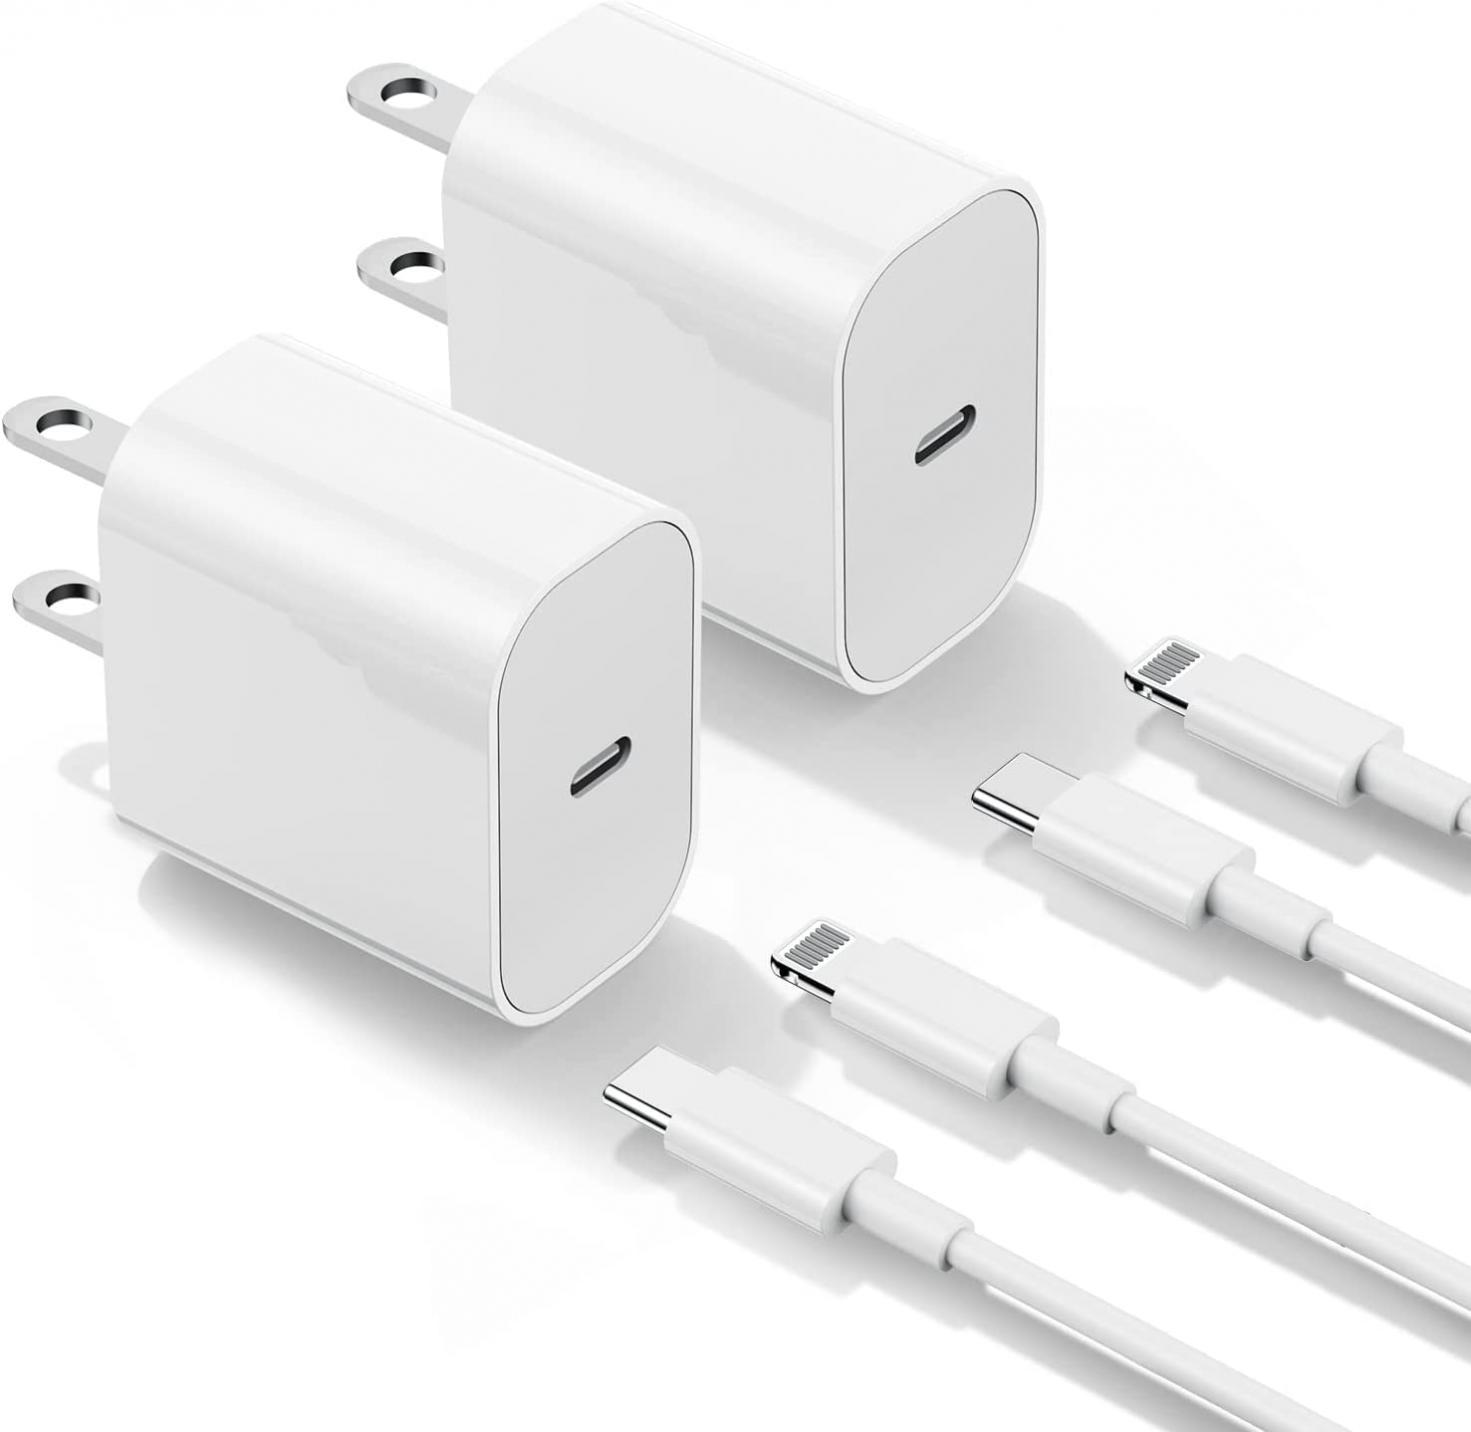 iPhone 14 13 12 Charger Fast Charging, 20W Apple Fast Charger Block with USB C to Lightning Cable 6ft, Type C Wall Plug with Cord Apple Chargers for iPhone 14 13 12 11 XS Pro Max Plus iPad (2-Pack)